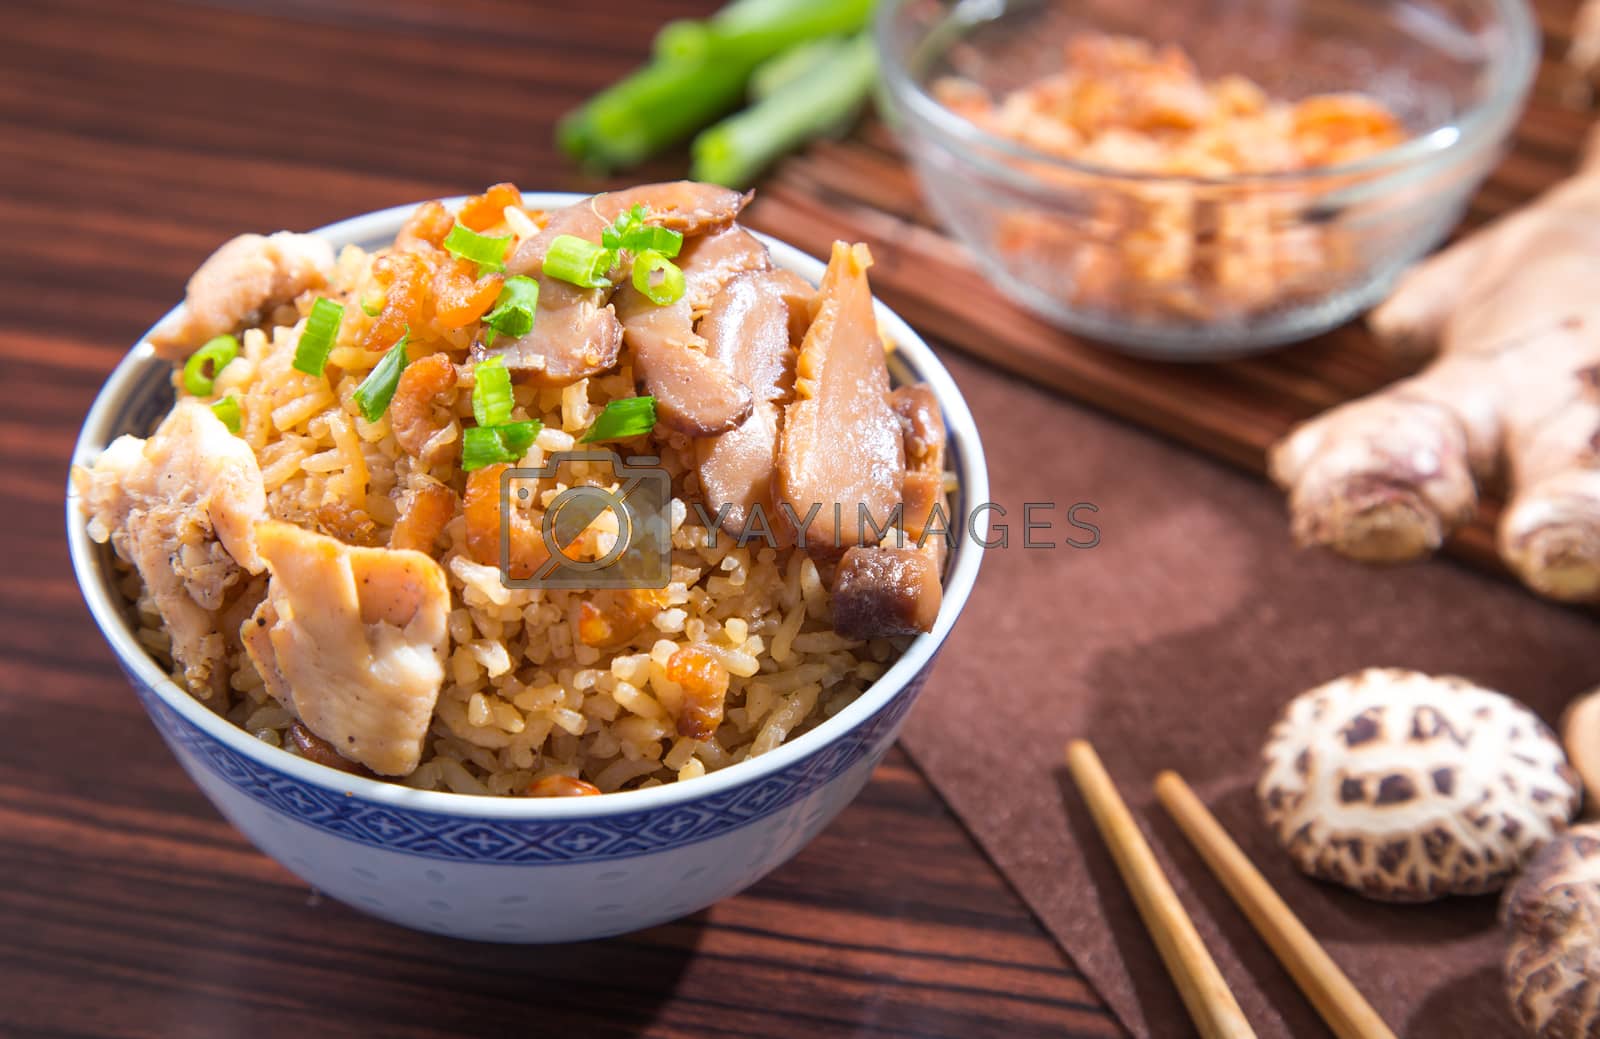 Royalty free image of chinese steam rice by tehcheesiong